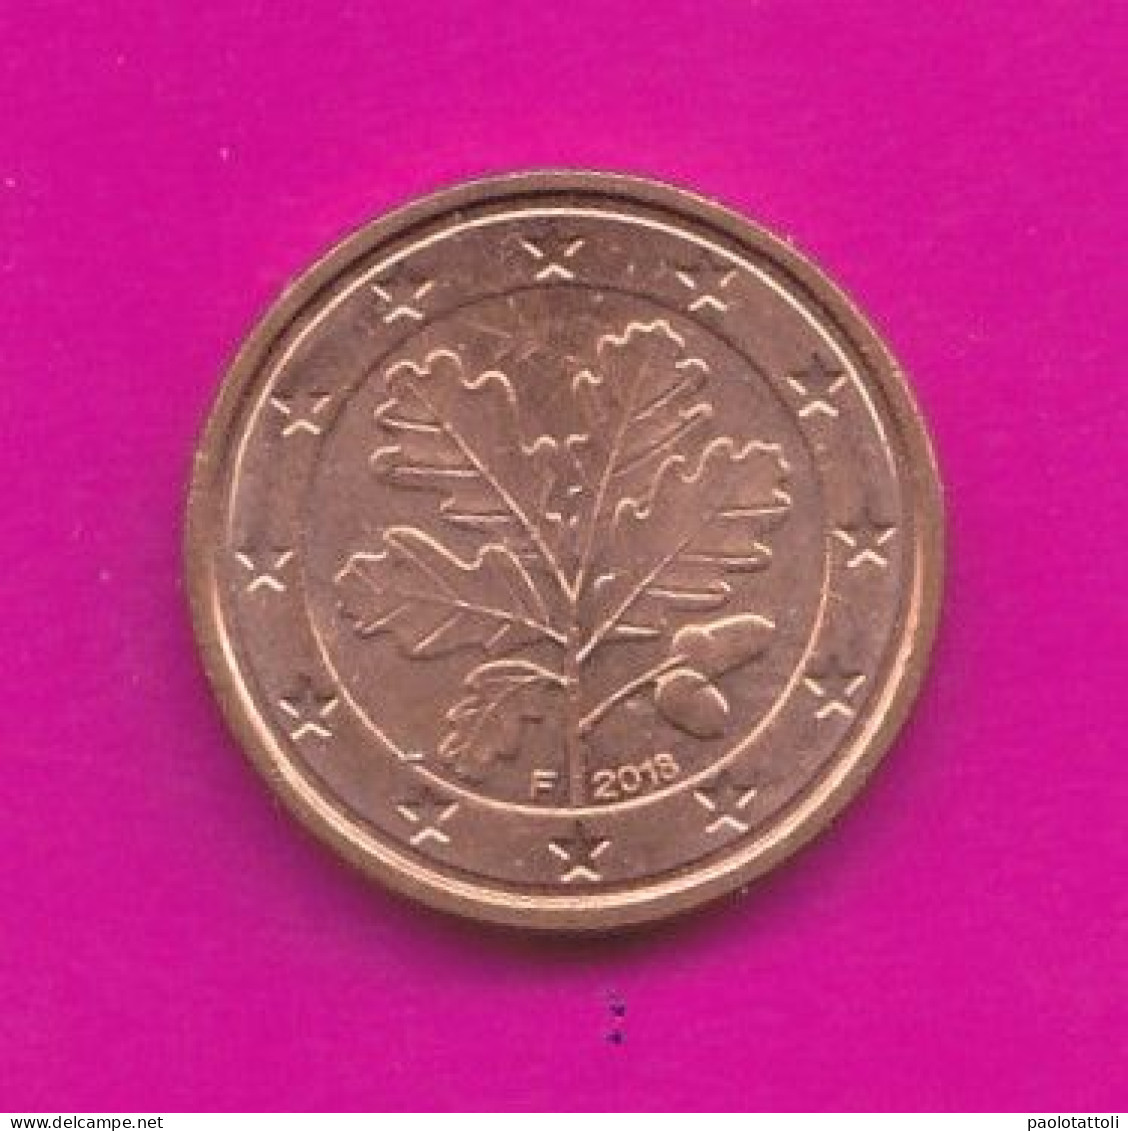 Germany, F 2018- 1 Euro Cent- Mint Of Stoccarda- Copper Plated Steel- Obverse Oak Leaf. Reverse Denomination- - Germania